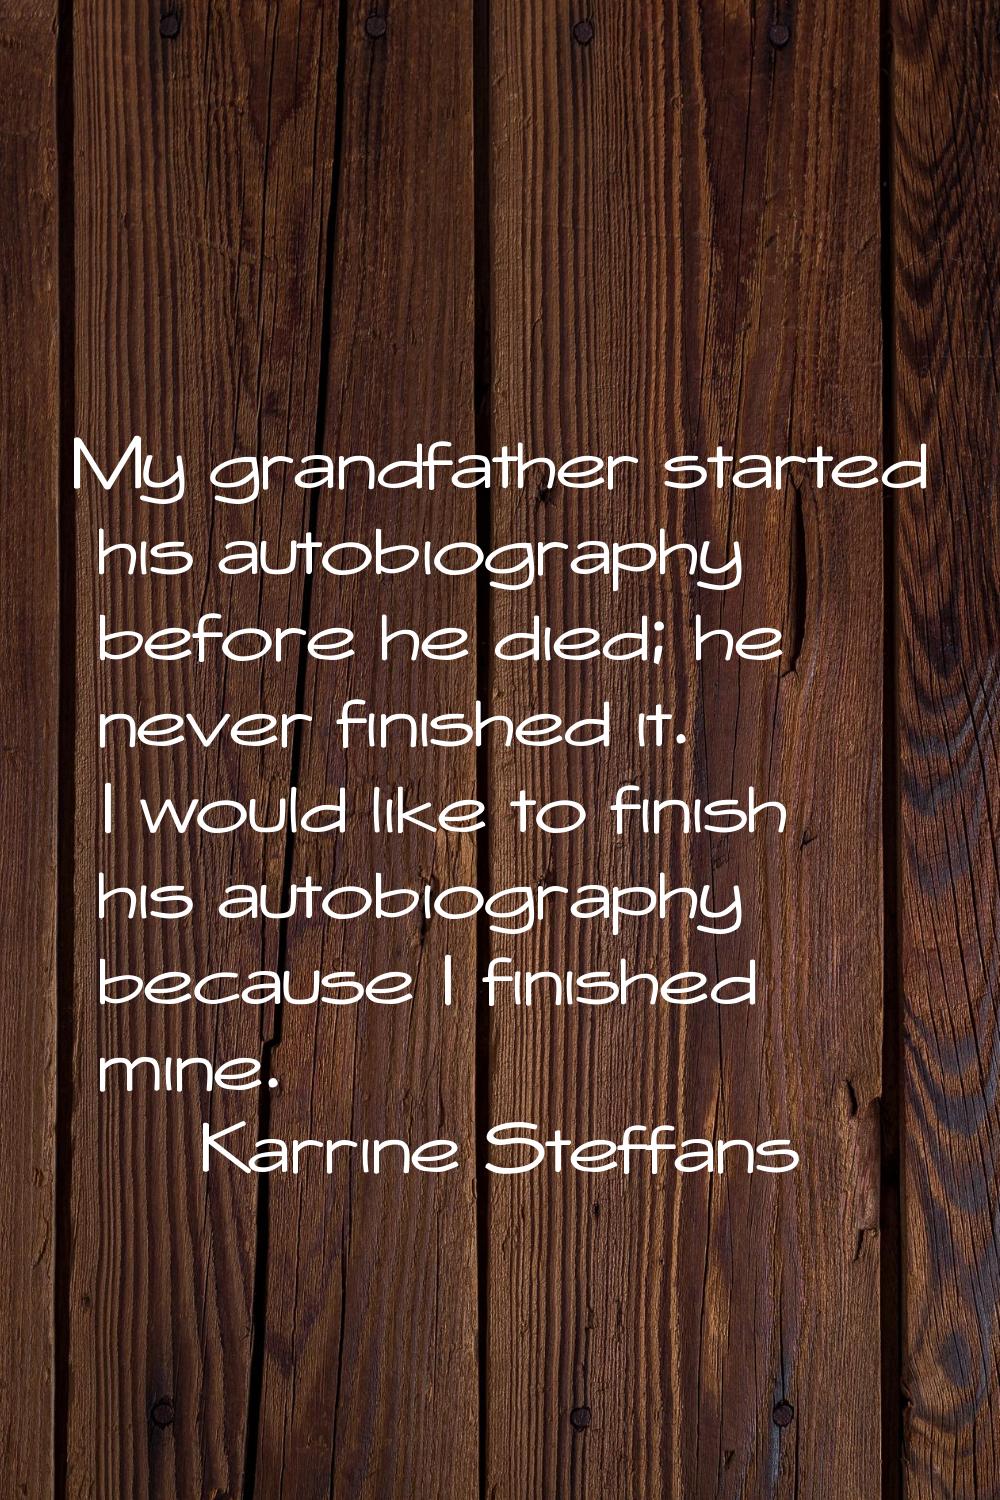 My grandfather started his autobiography before he died; he never finished it. I would like to fini